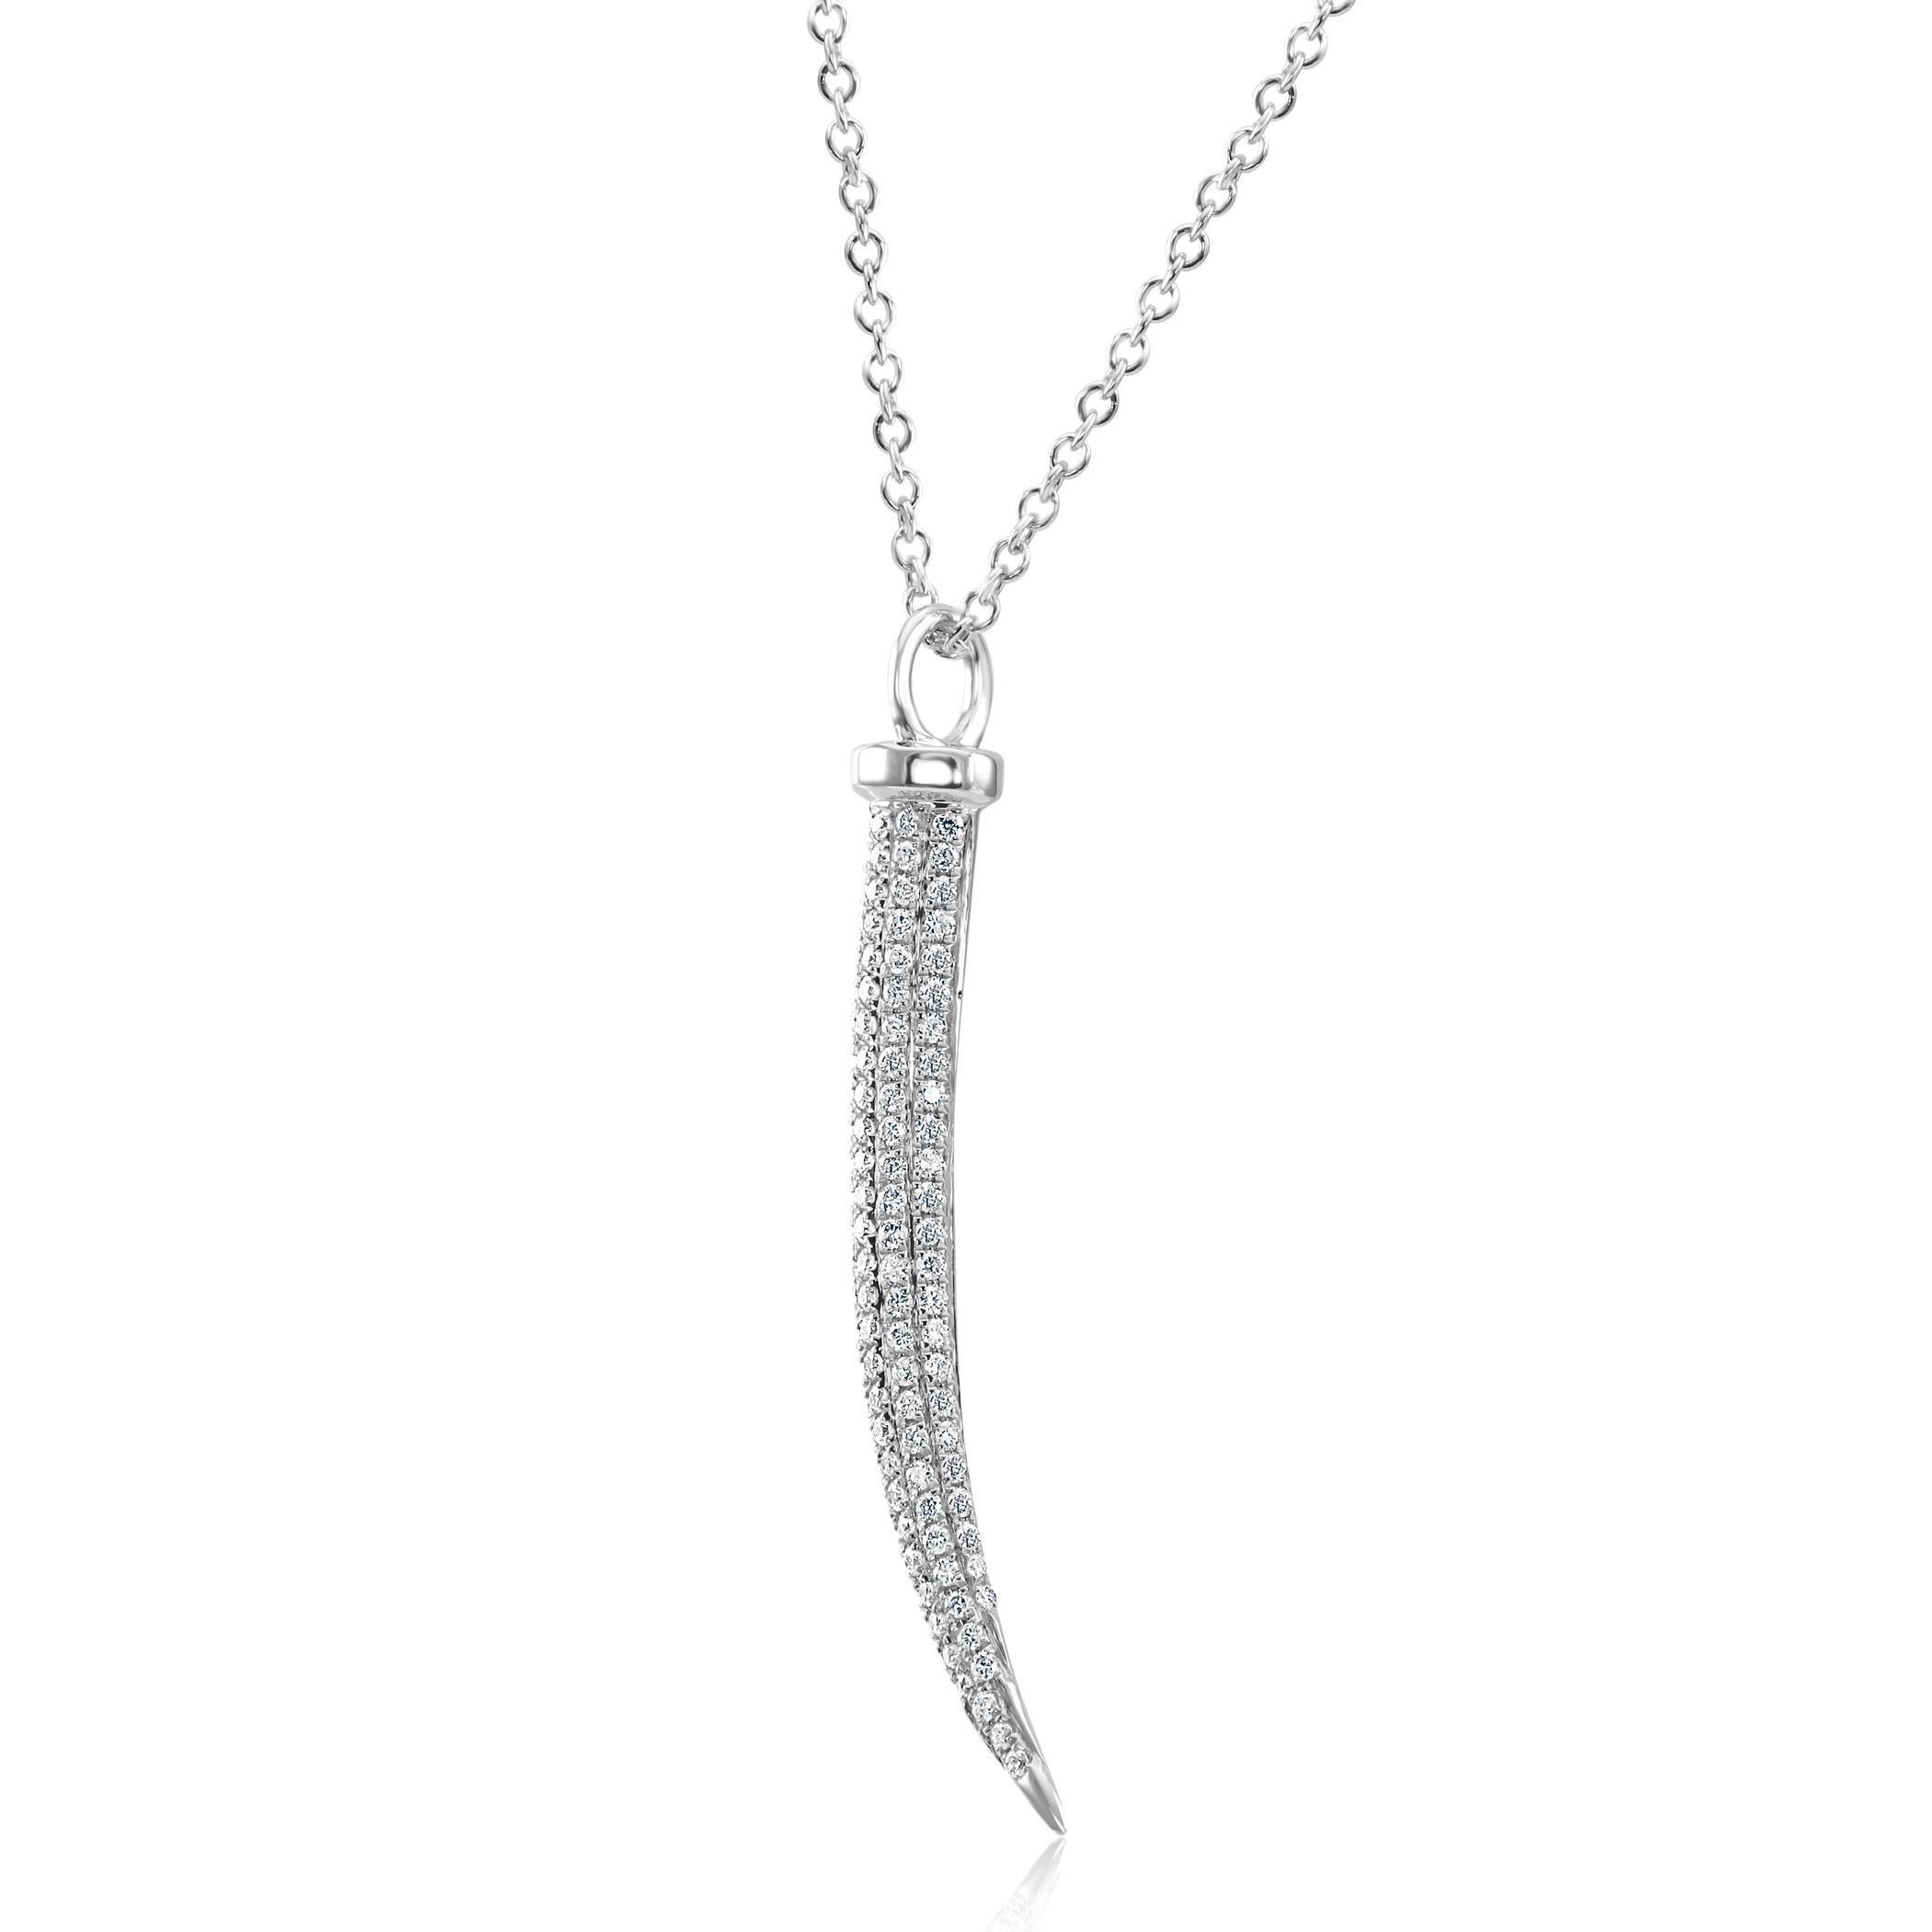 This extraordinary pendant has 105 dazzling White Diamond Rounds, meticulously arranged to create a striking visual impact. With a combined weight of 0.28 carats, these diamonds exude brilliance and sparkle, adding an element of luxury to the